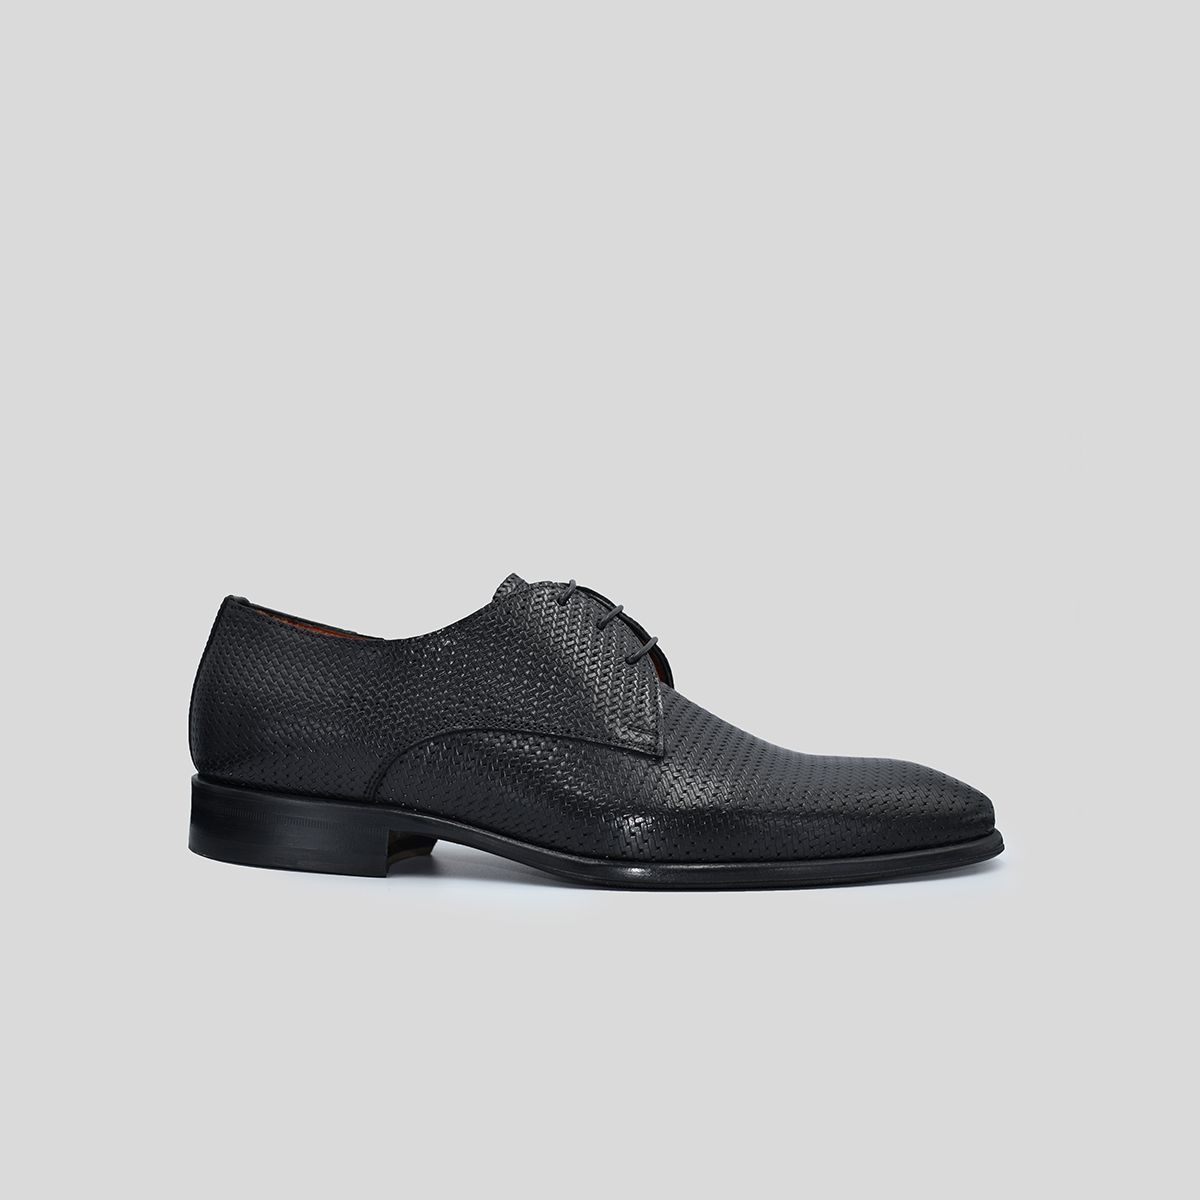 Black Textured Oxford Shoes